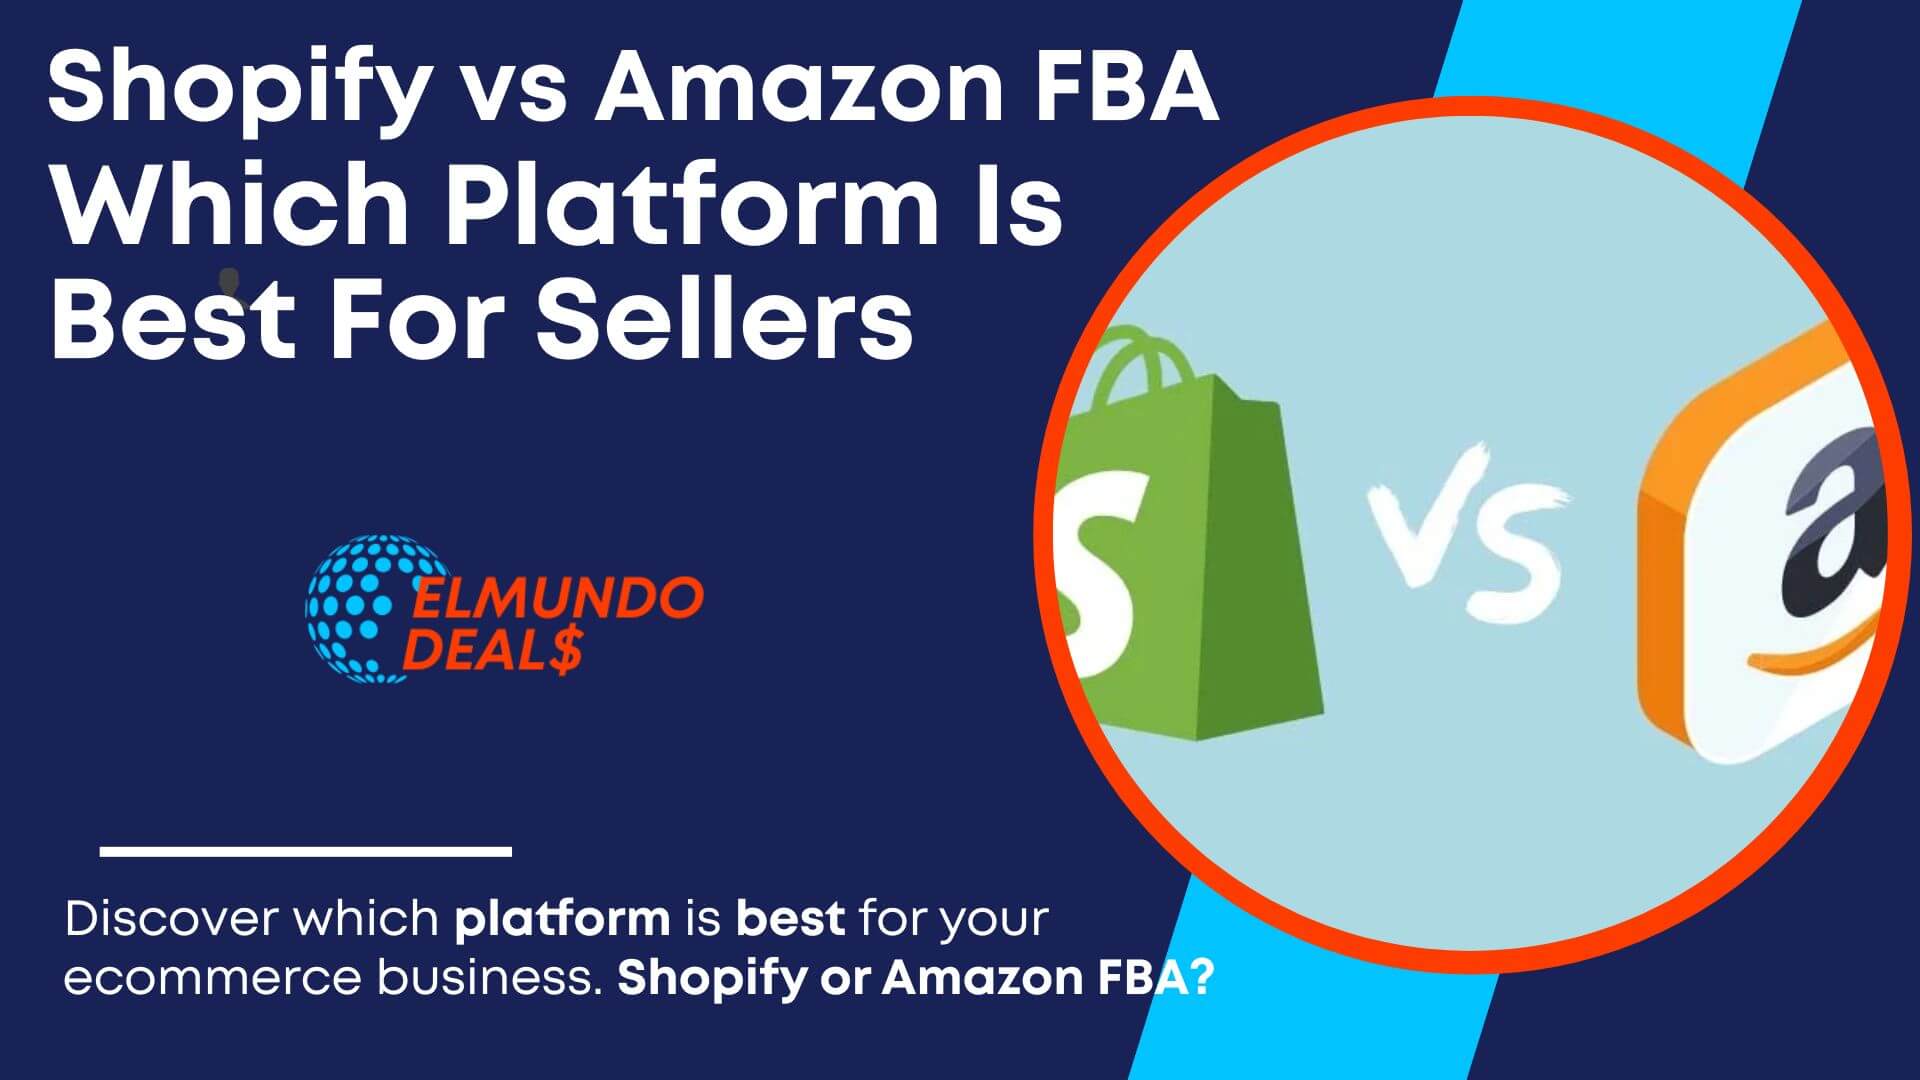 Shopify Vs Amazon FBA - Which Platform Is Good For Sellers In 2023?